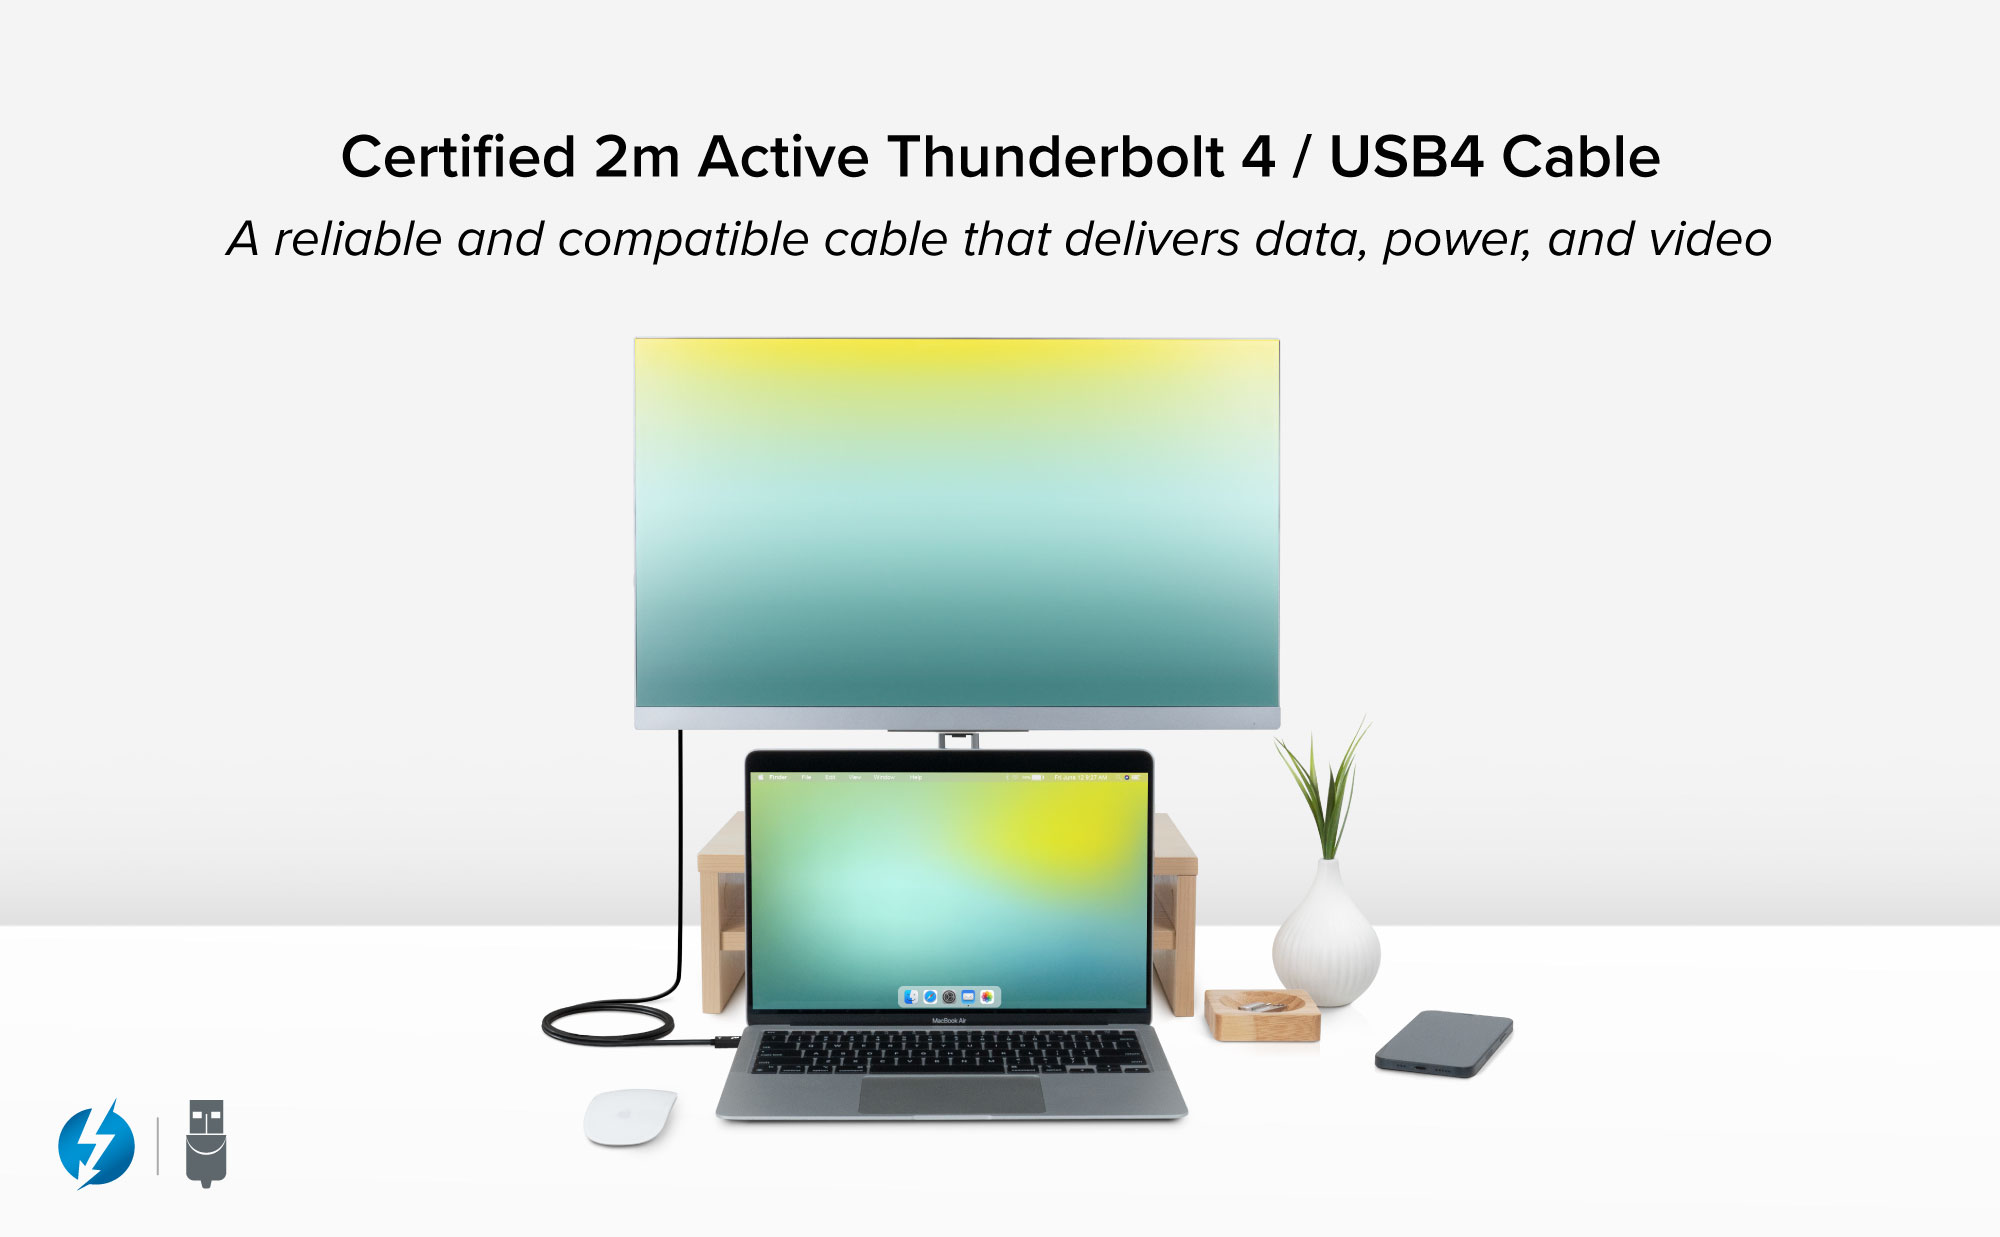 Certified 2m Active thunderbolt 4 / USB4 Cable